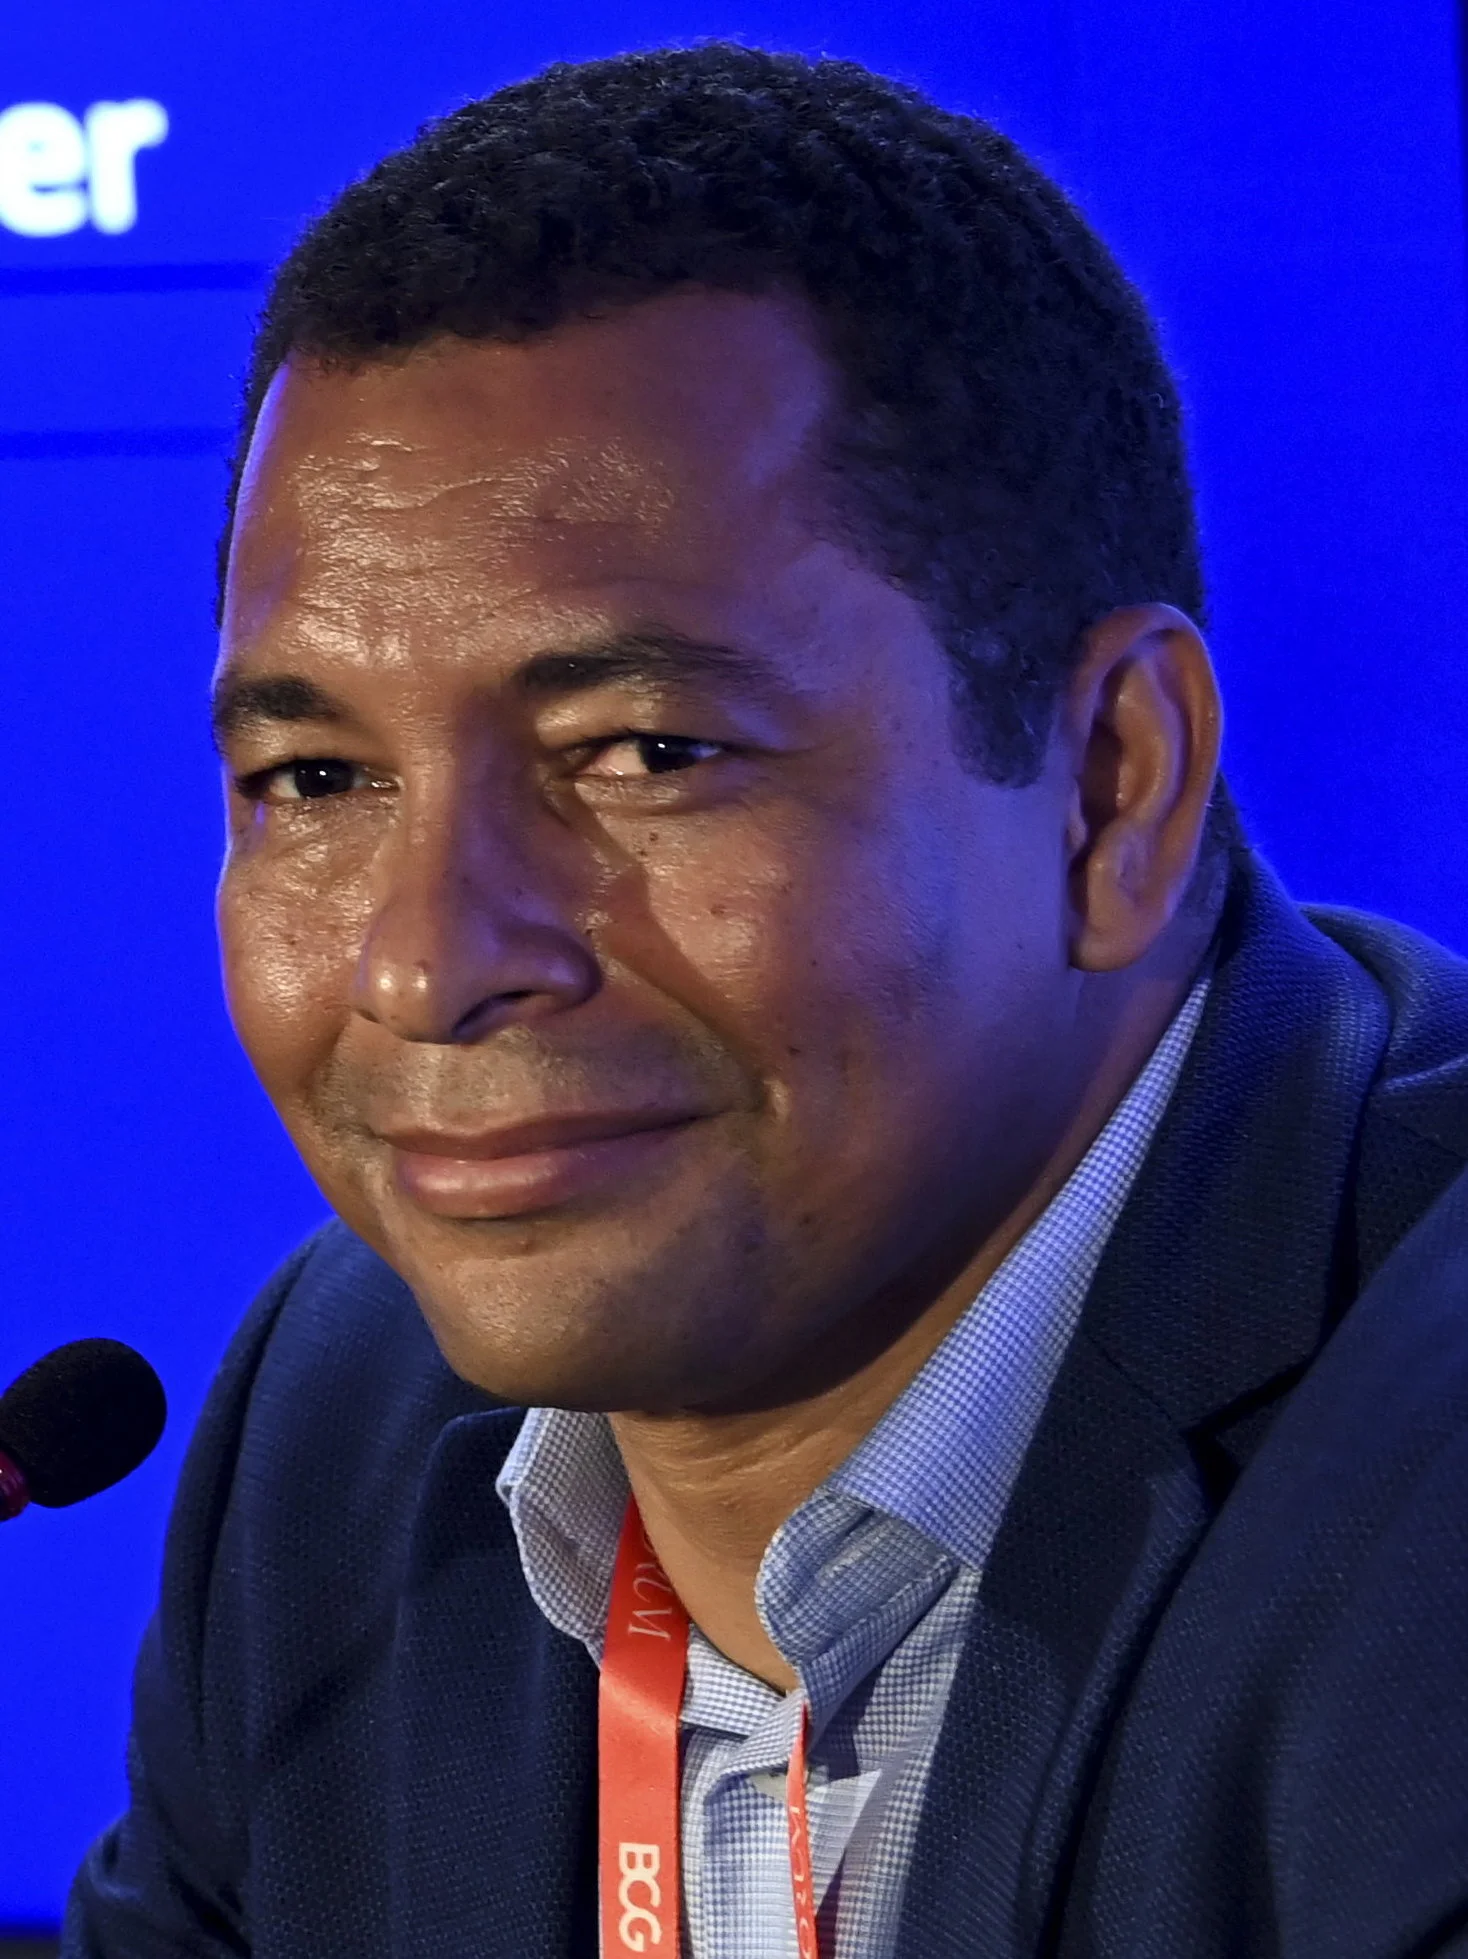 EPL: It’s not about helping Arsenal – Gilberto Silva sends message to Tottenham